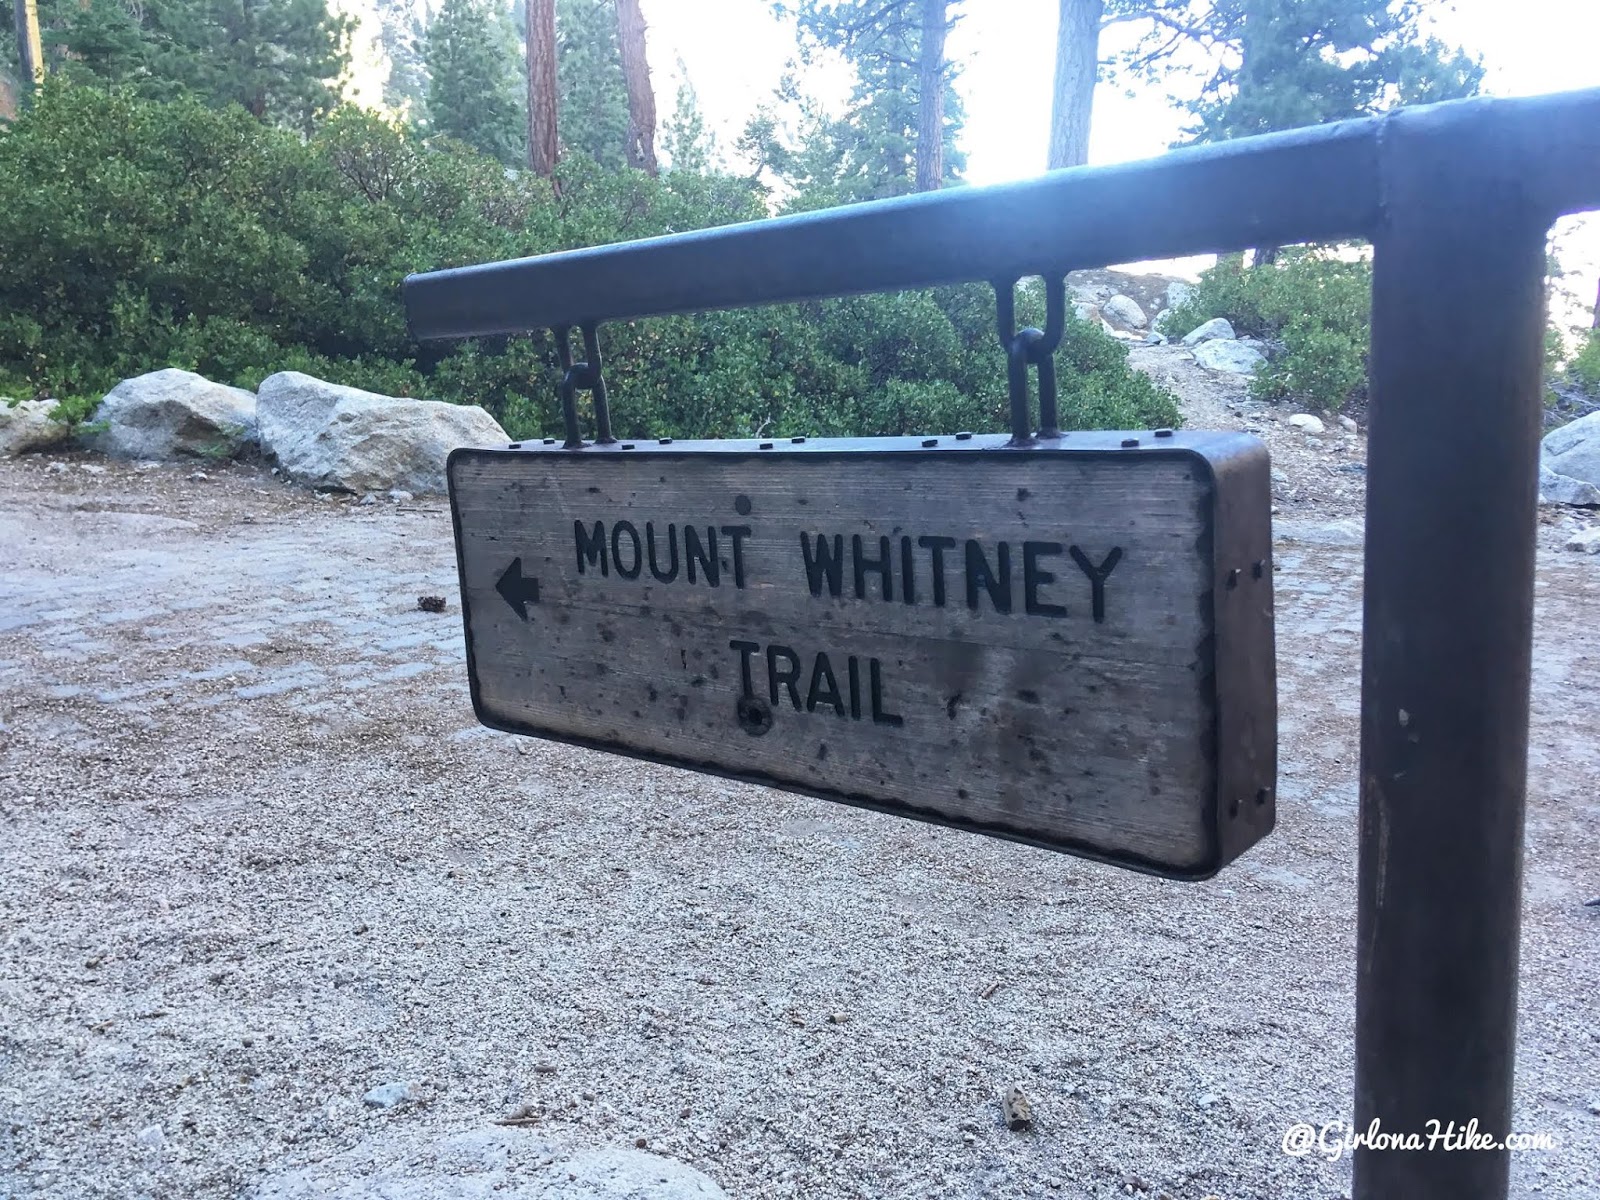 Hiking to Mt.Whitney, Hiking Mt.Whitney in 2020, Hiking the highest point in the lower 48 states, hiking in California